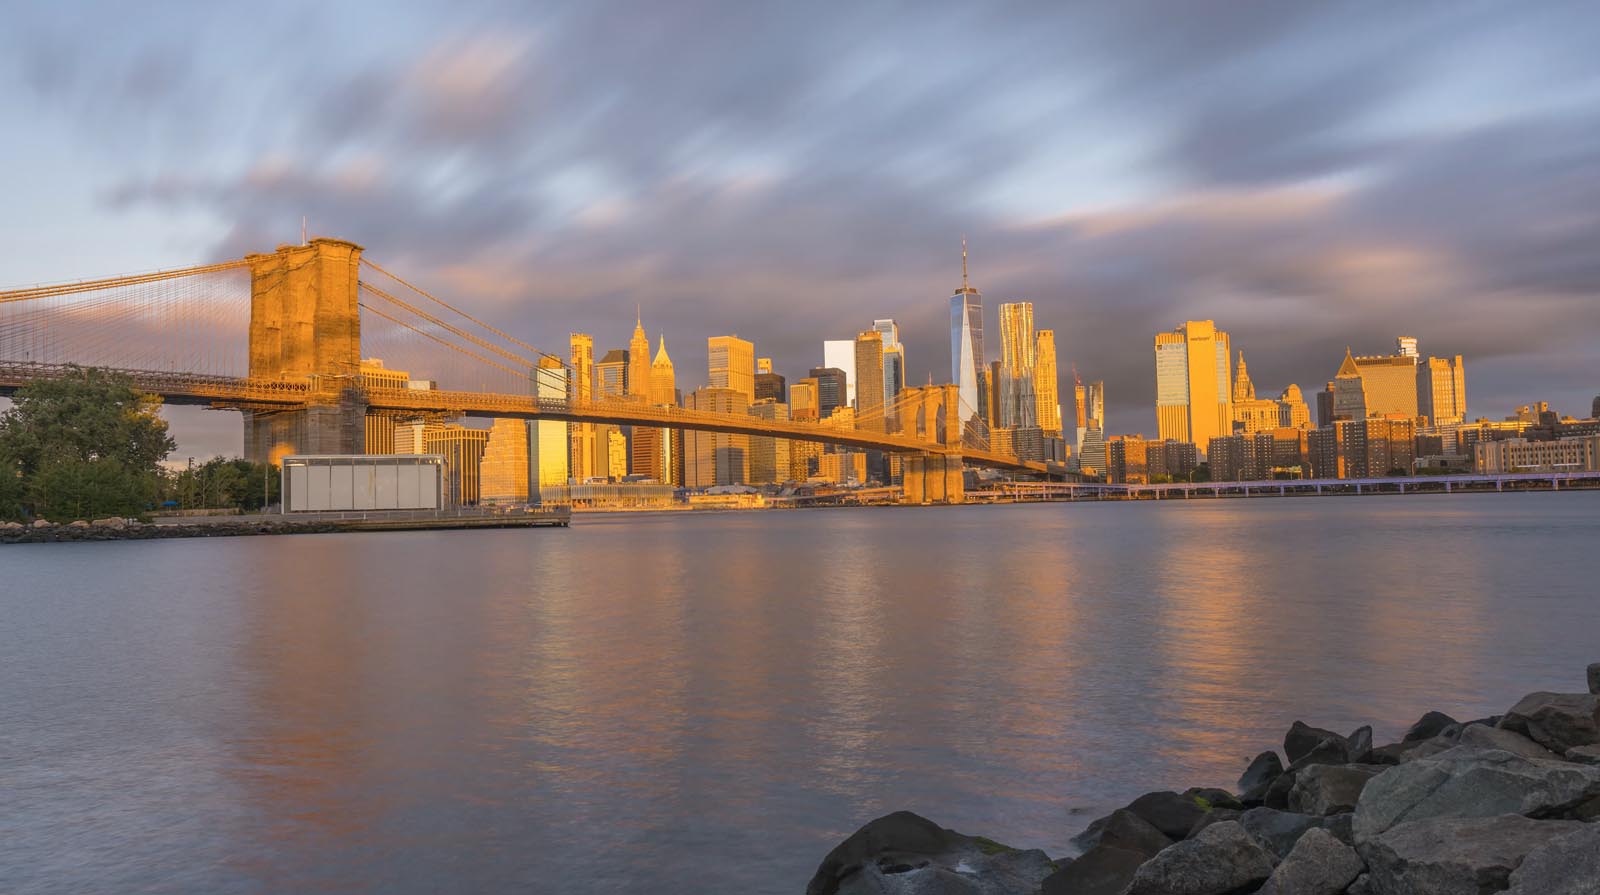 A photo of the Manhattan Skyline from Brooklyn at golden hour sunrise.